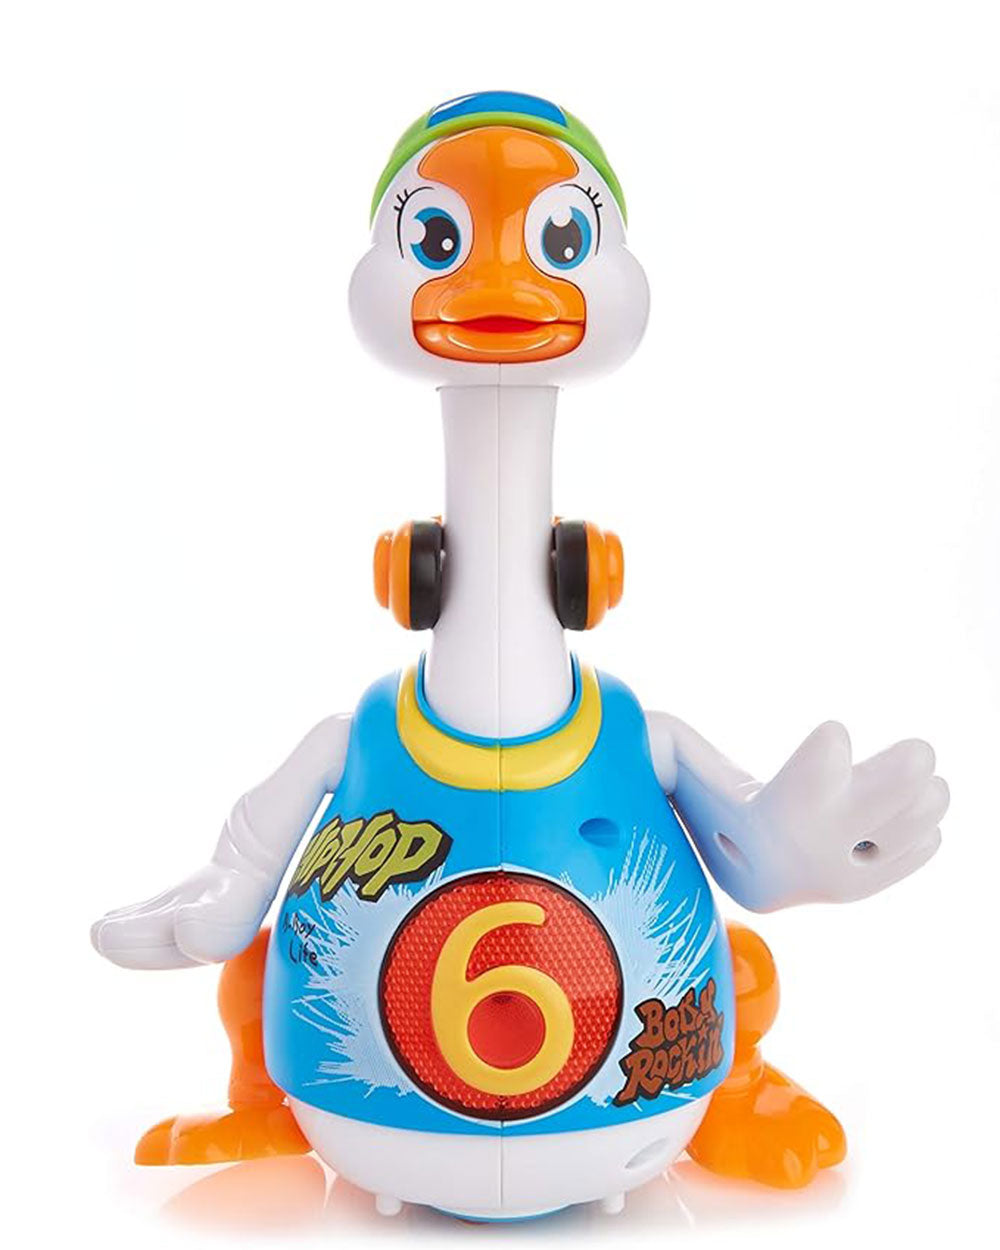 Play Pride Early Education Interactive Hip Hop Goose 18m+